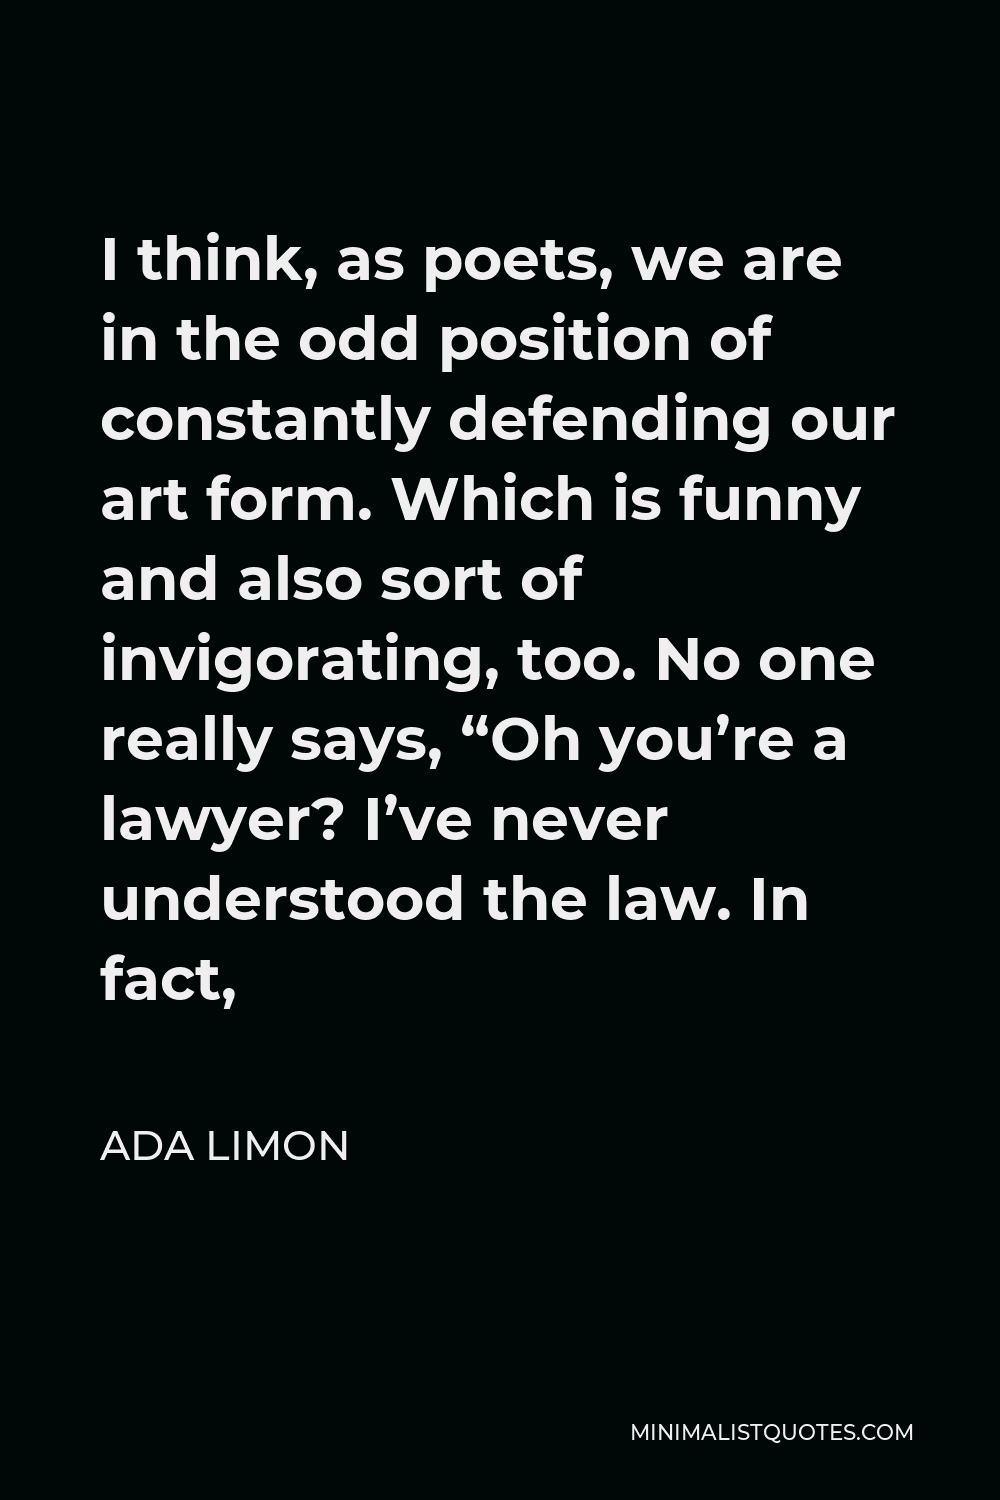 Ada Limon Quote - I think, as poets, we are in the odd position of constantly defending our art form. Which is funny and also sort of invigorating, too. No one really says, “Oh you’re a lawyer? I’ve never understood the law. In fact,